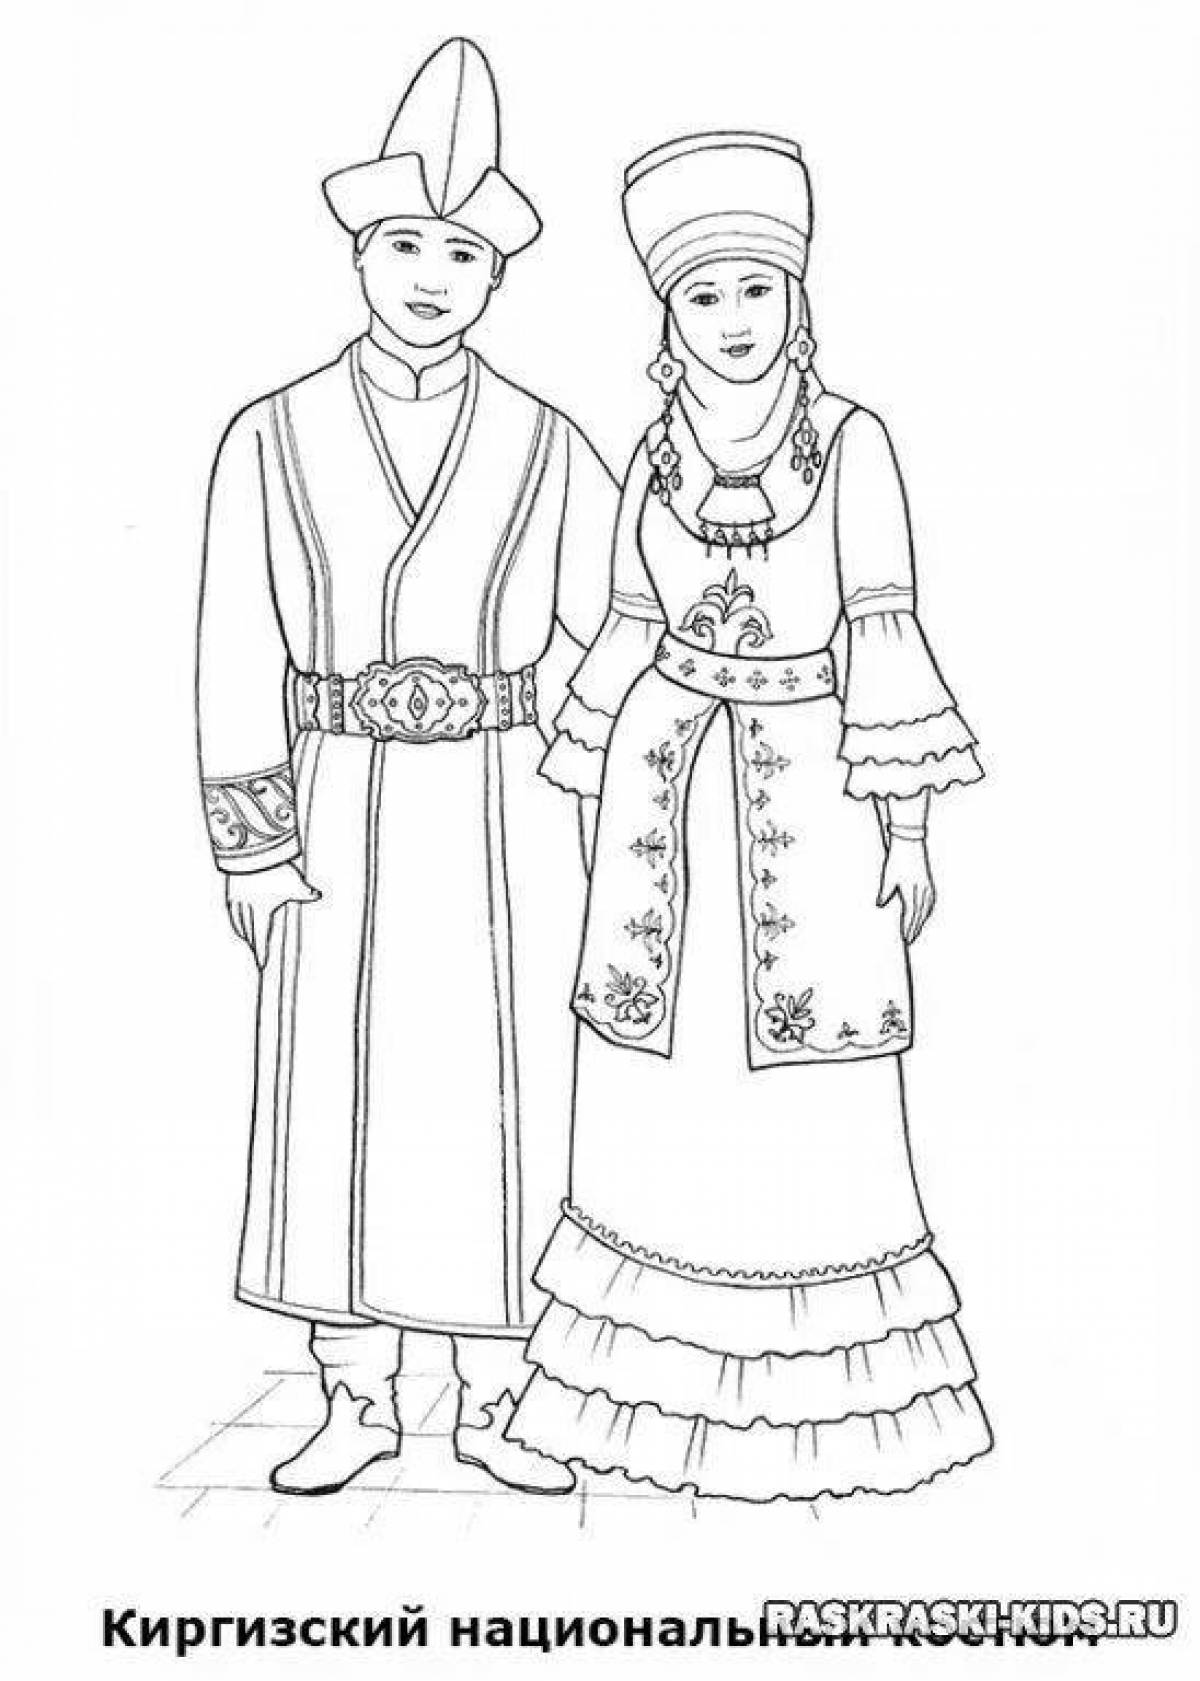 Luxurious costumes of Russian people